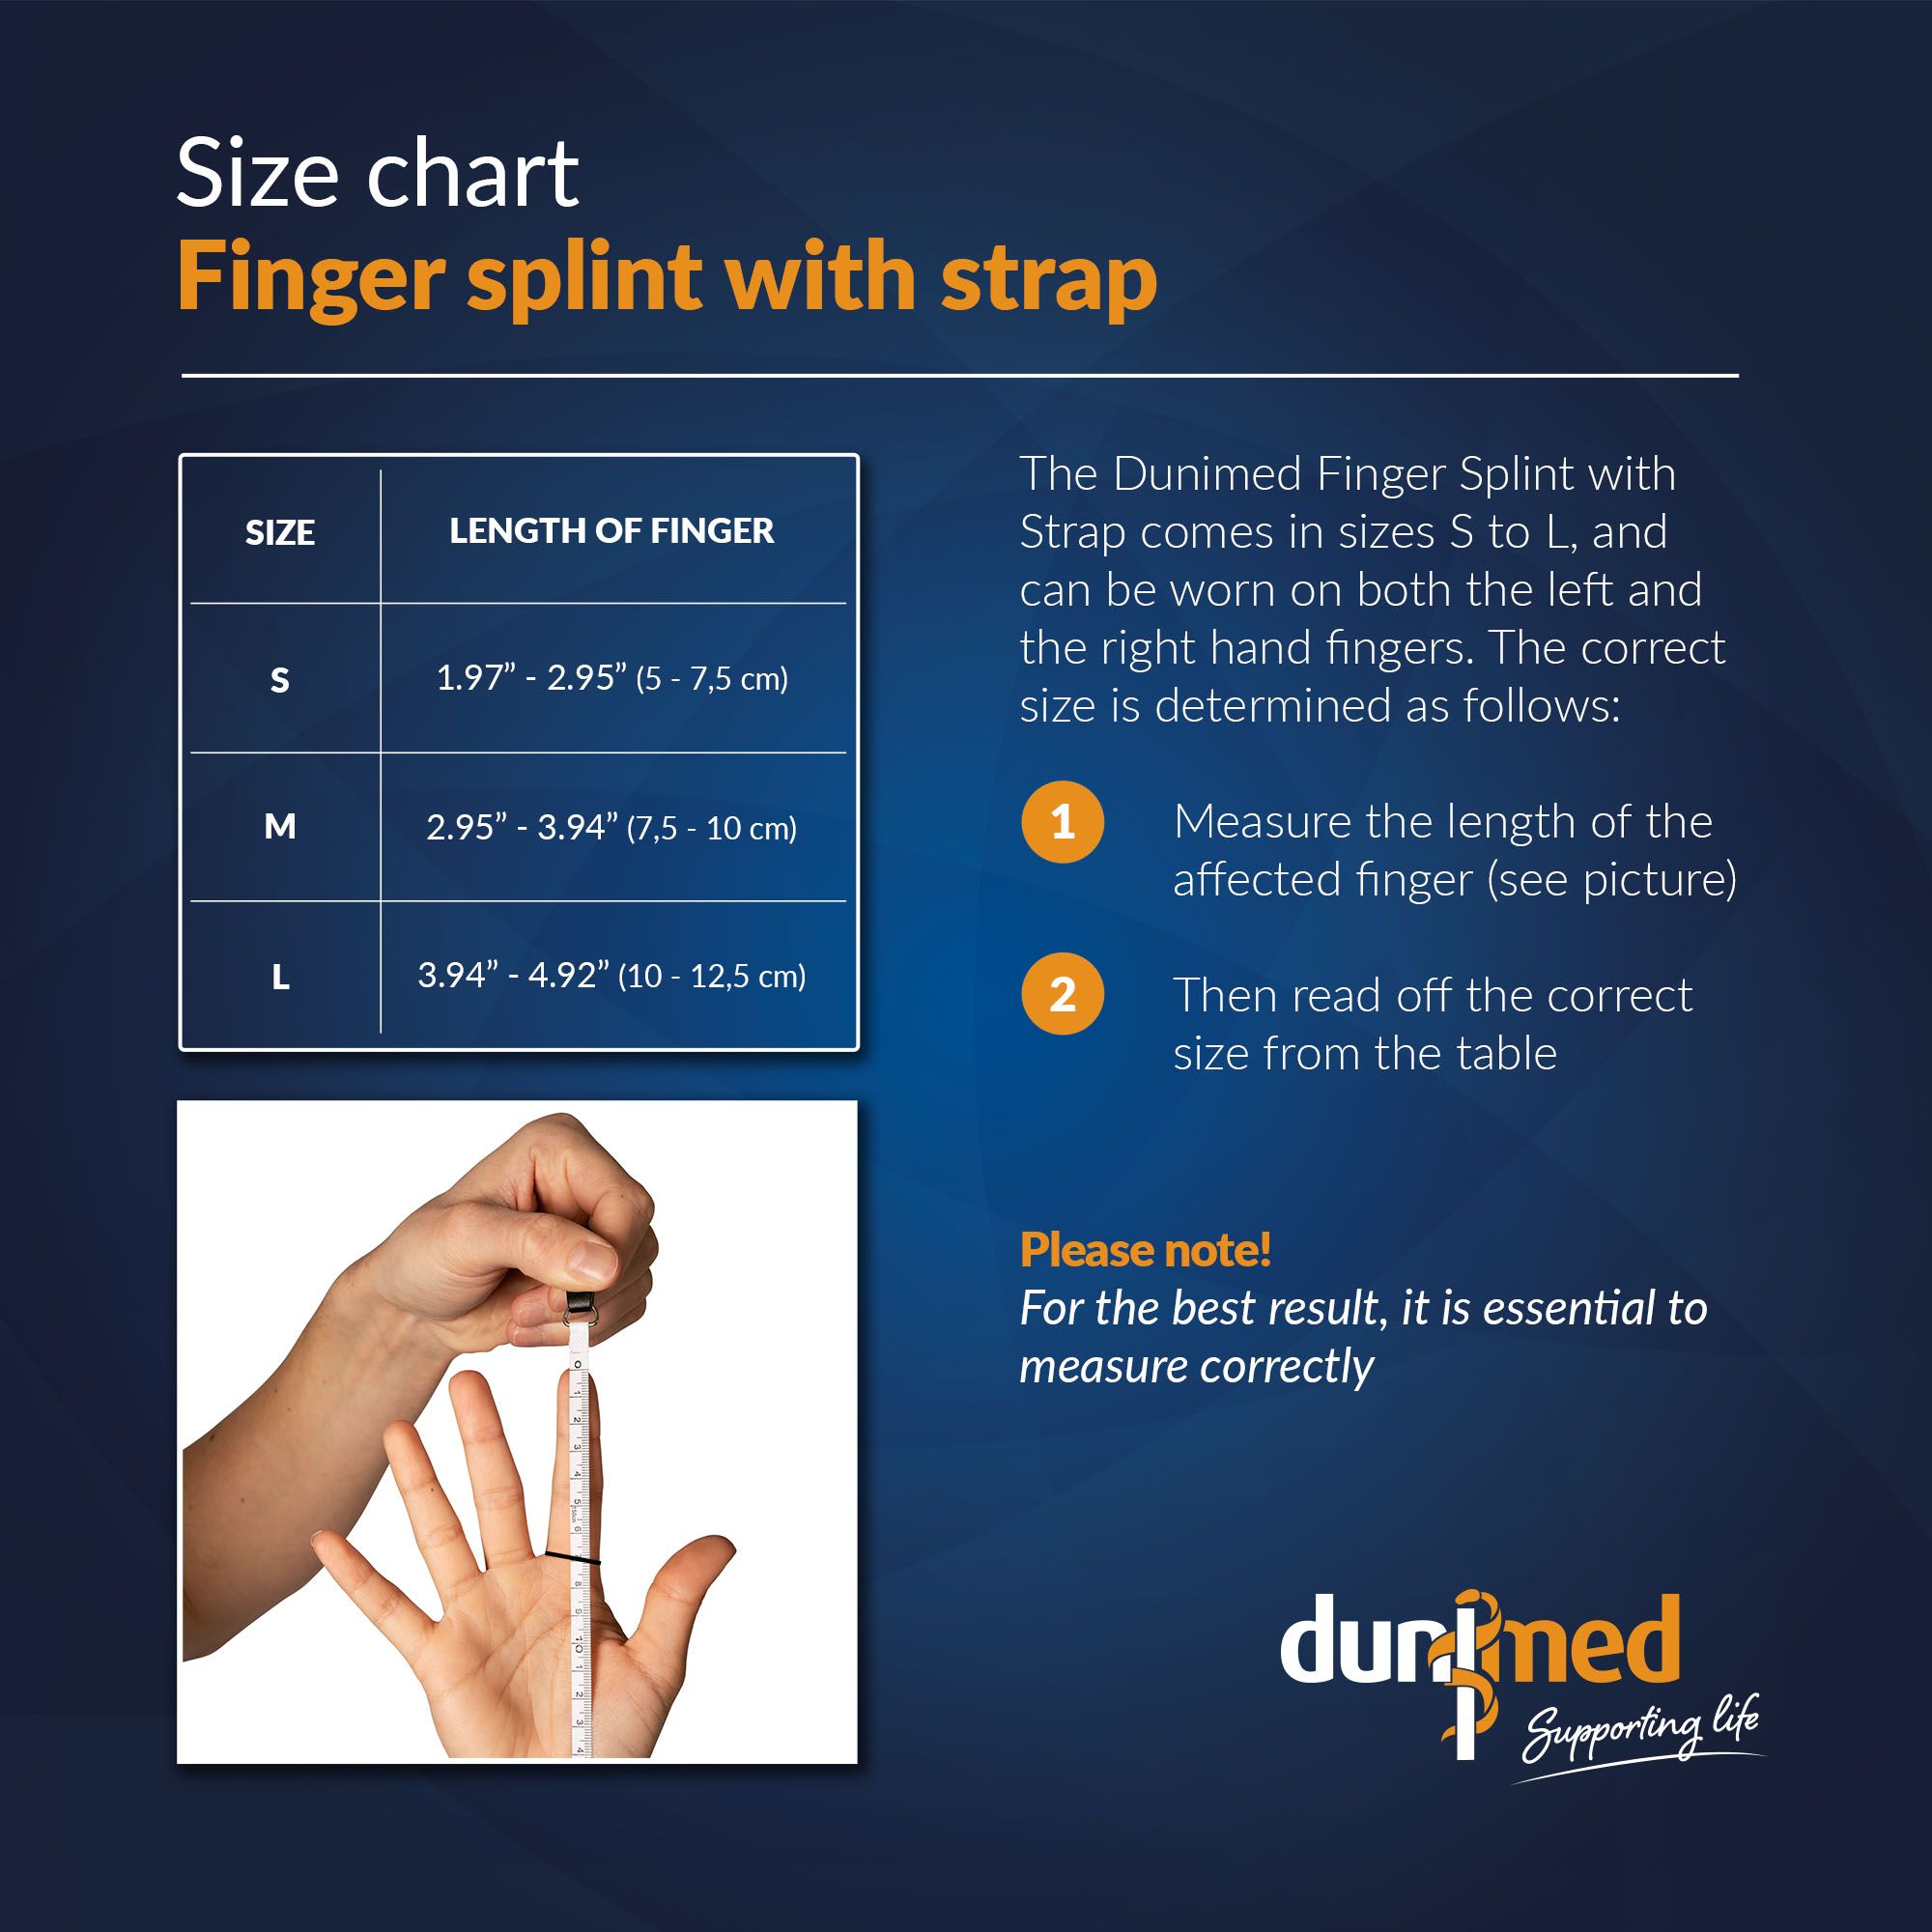 Size Chart Dunimed Finger Splint with Strap